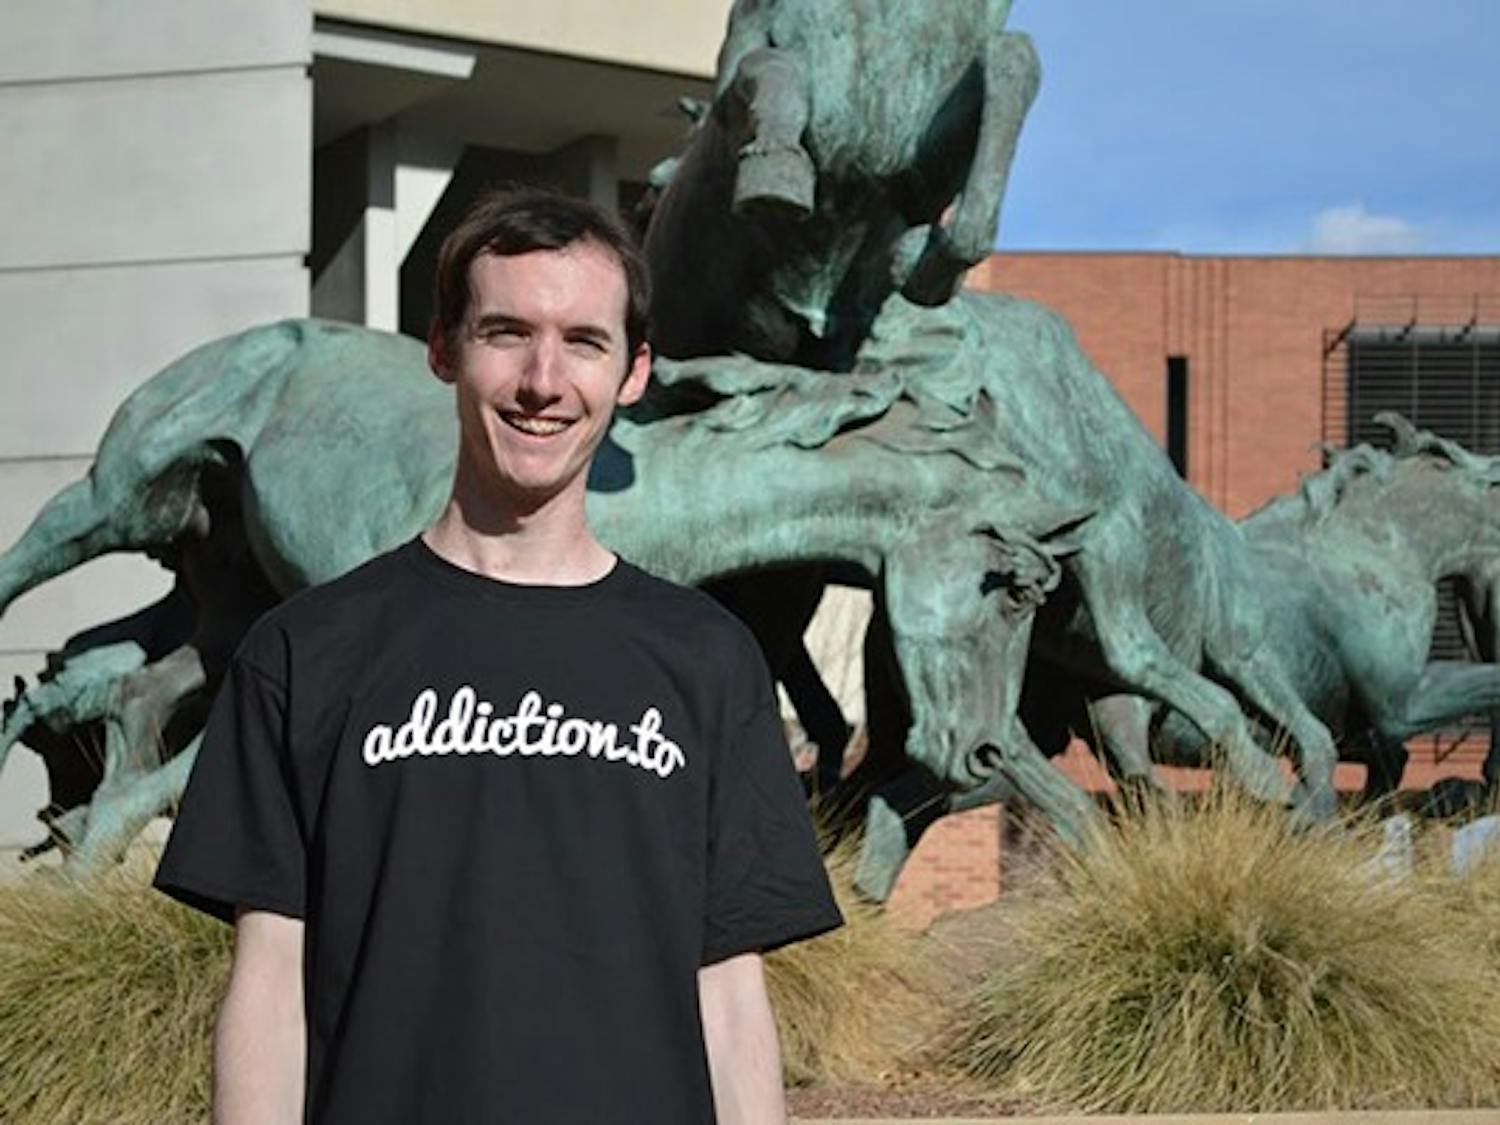 Scott Buscemi, a software developer working with ASU students, is releasing a new app to bring friends together using their interests. (Photo by Axel Everitt)